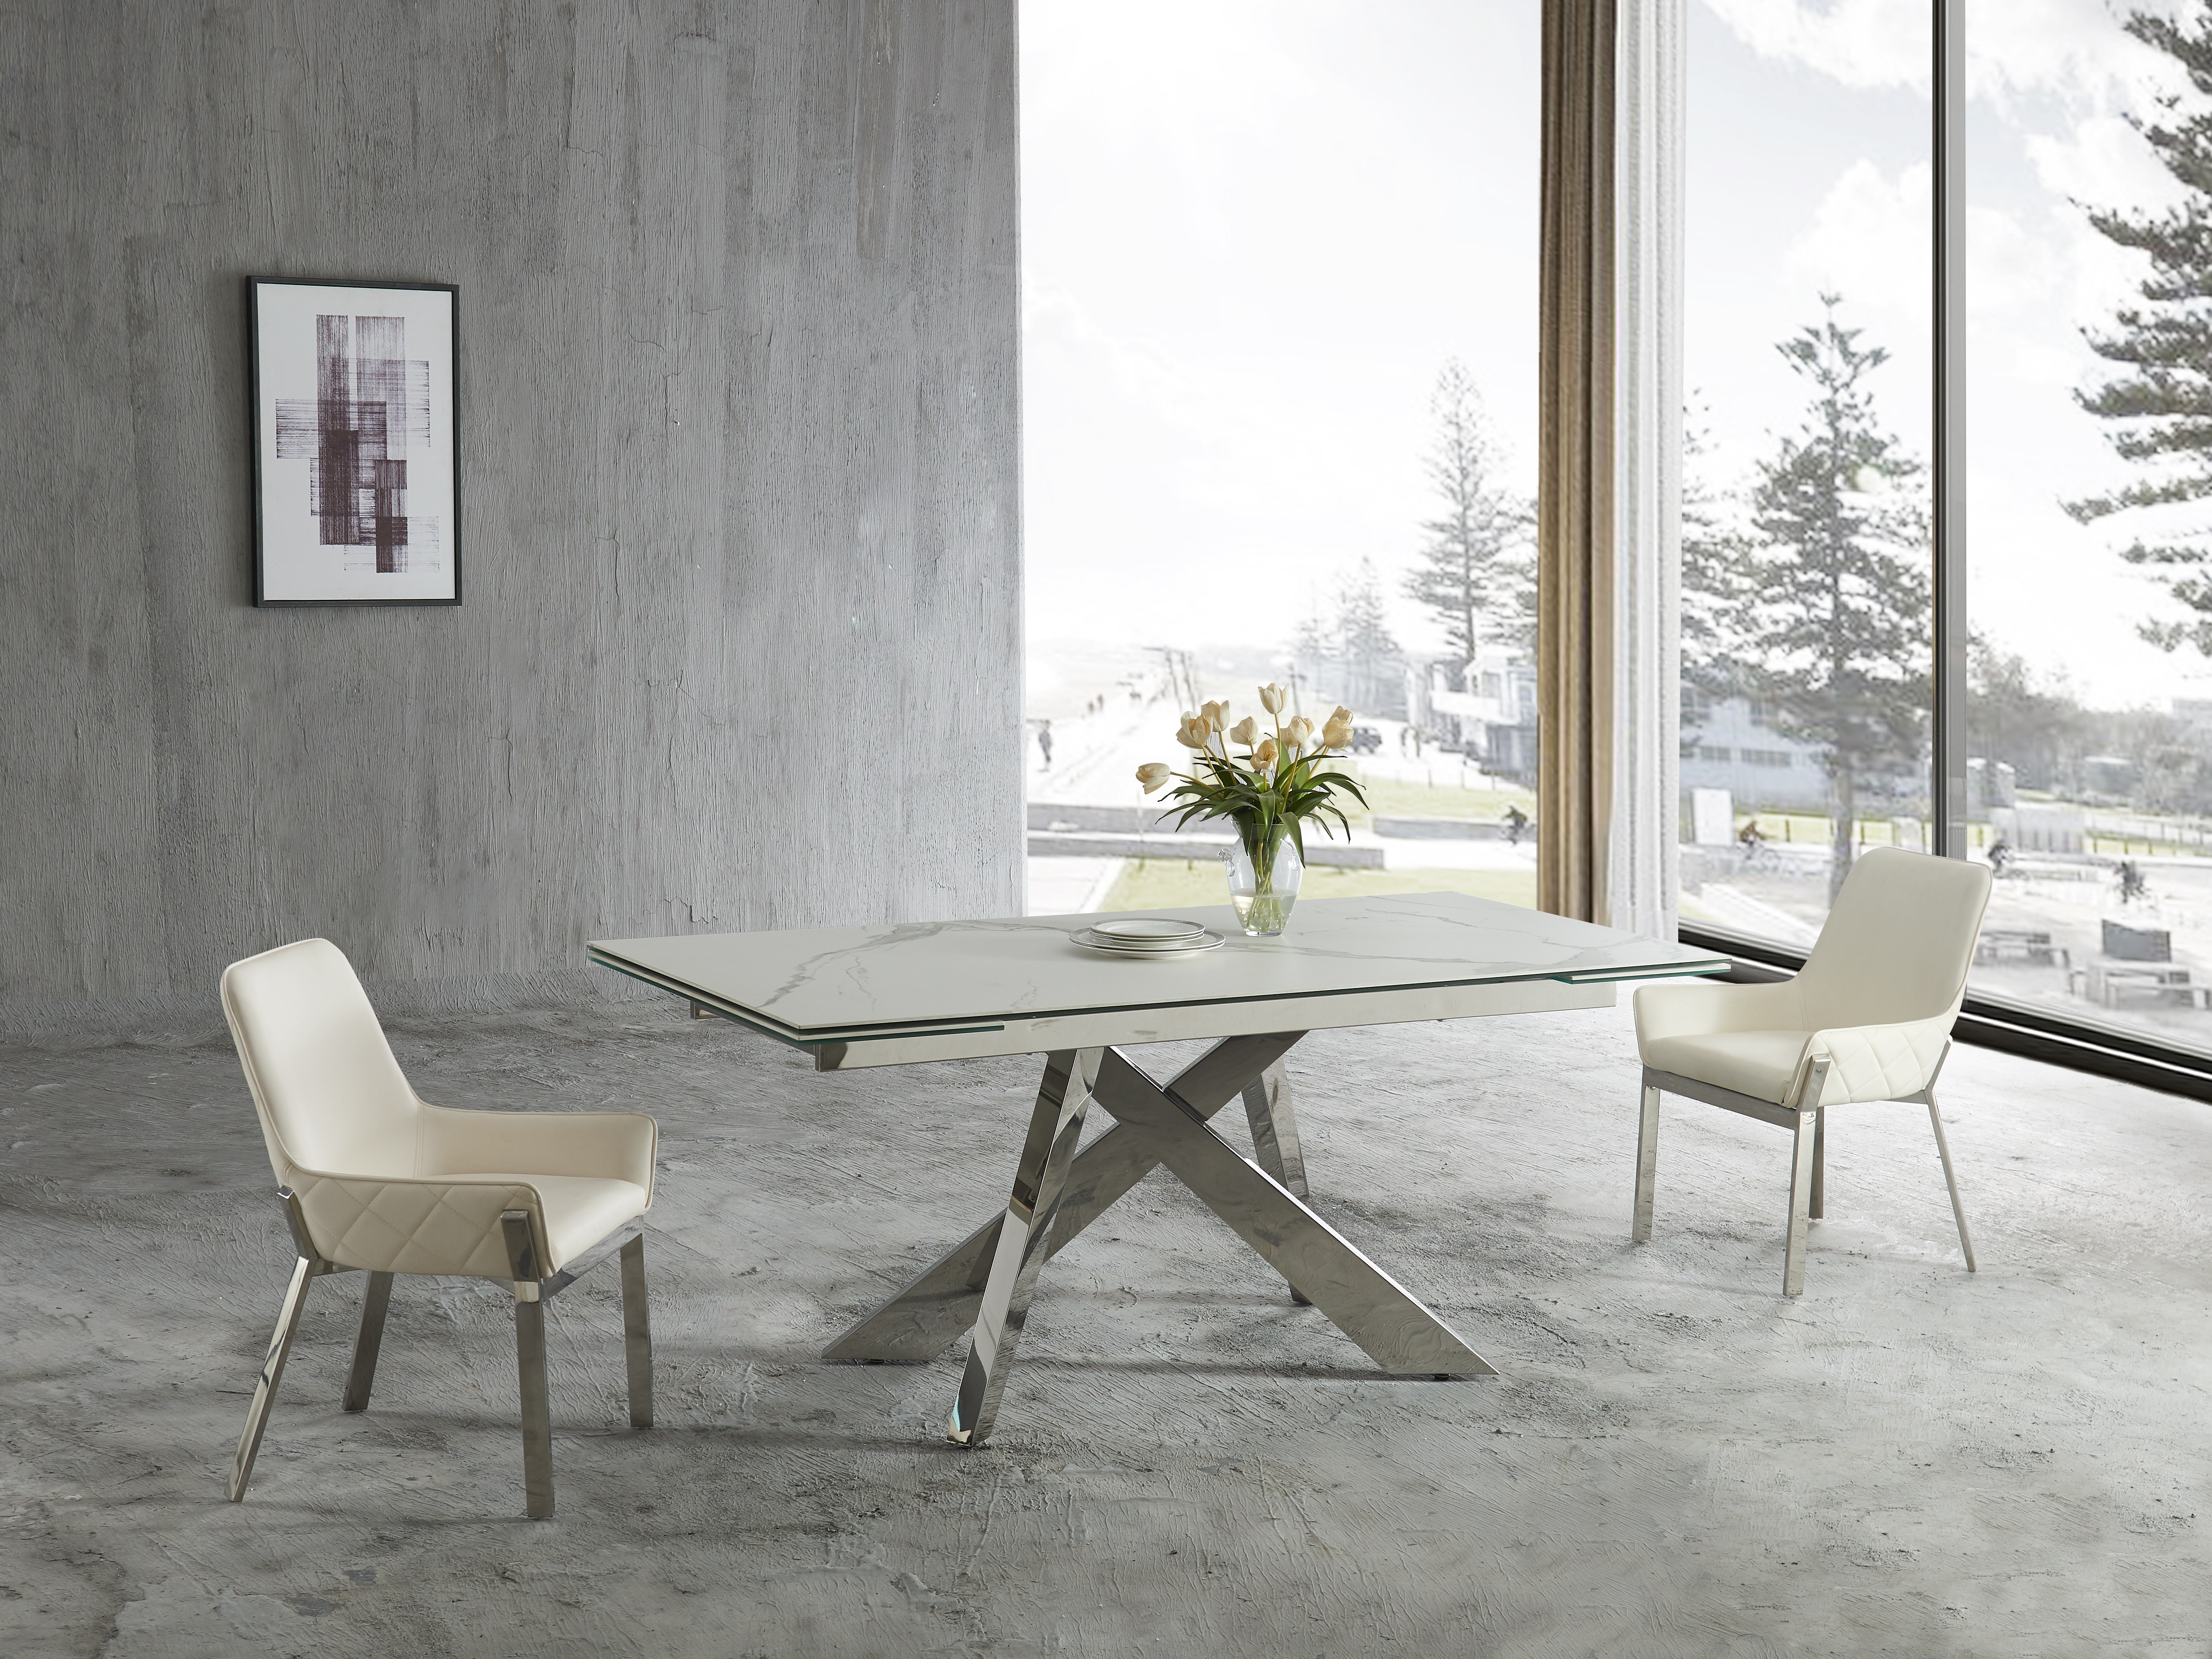 Modern Dining Set with Leather Chairs